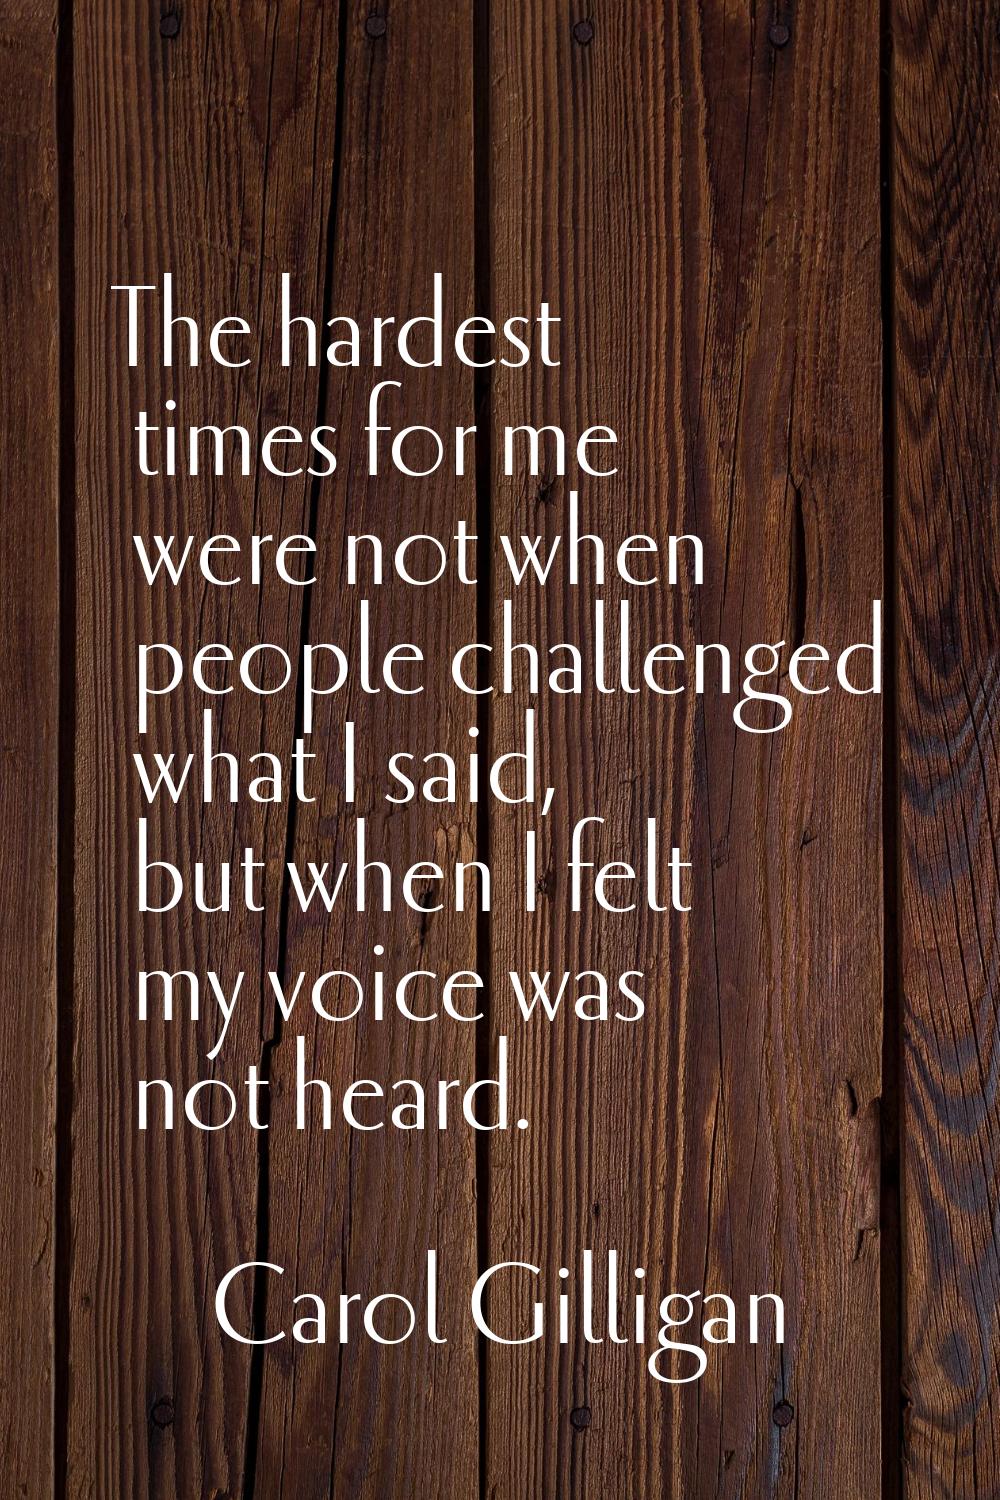 The hardest times for me were not when people challenged what I said, but when I felt my voice was 